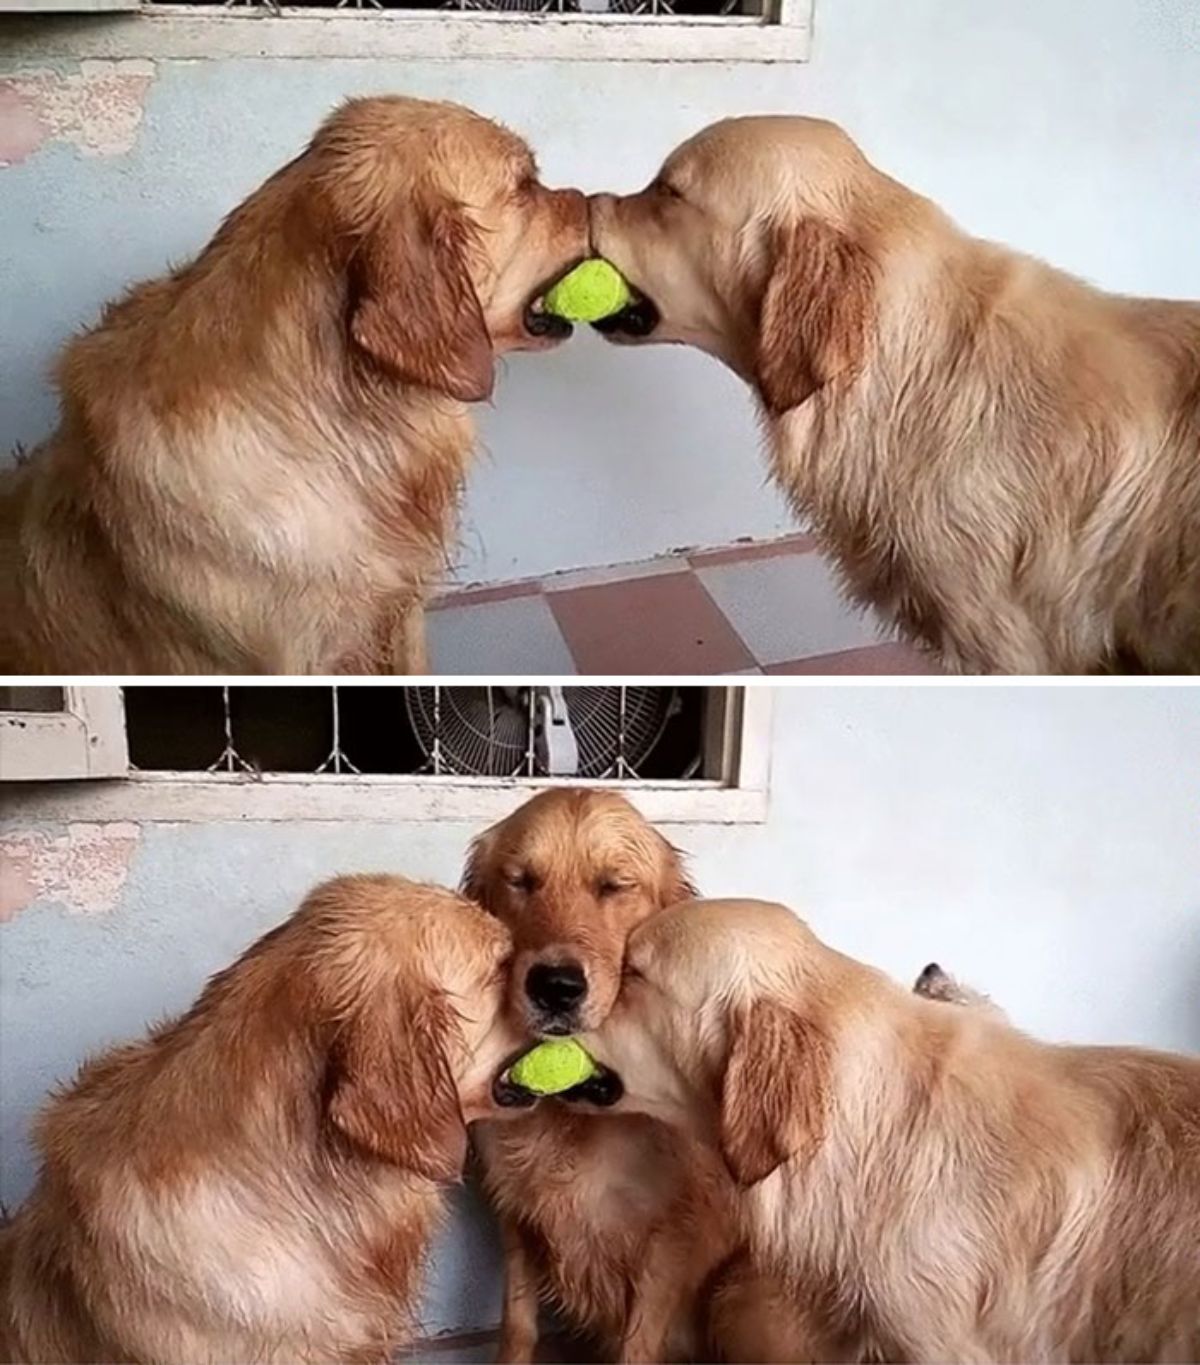 2 wet golden retrievers holding a tennis ball together in the first photo and in the second photo a third golden retriever has placed its snout on the other two dogs' snouts